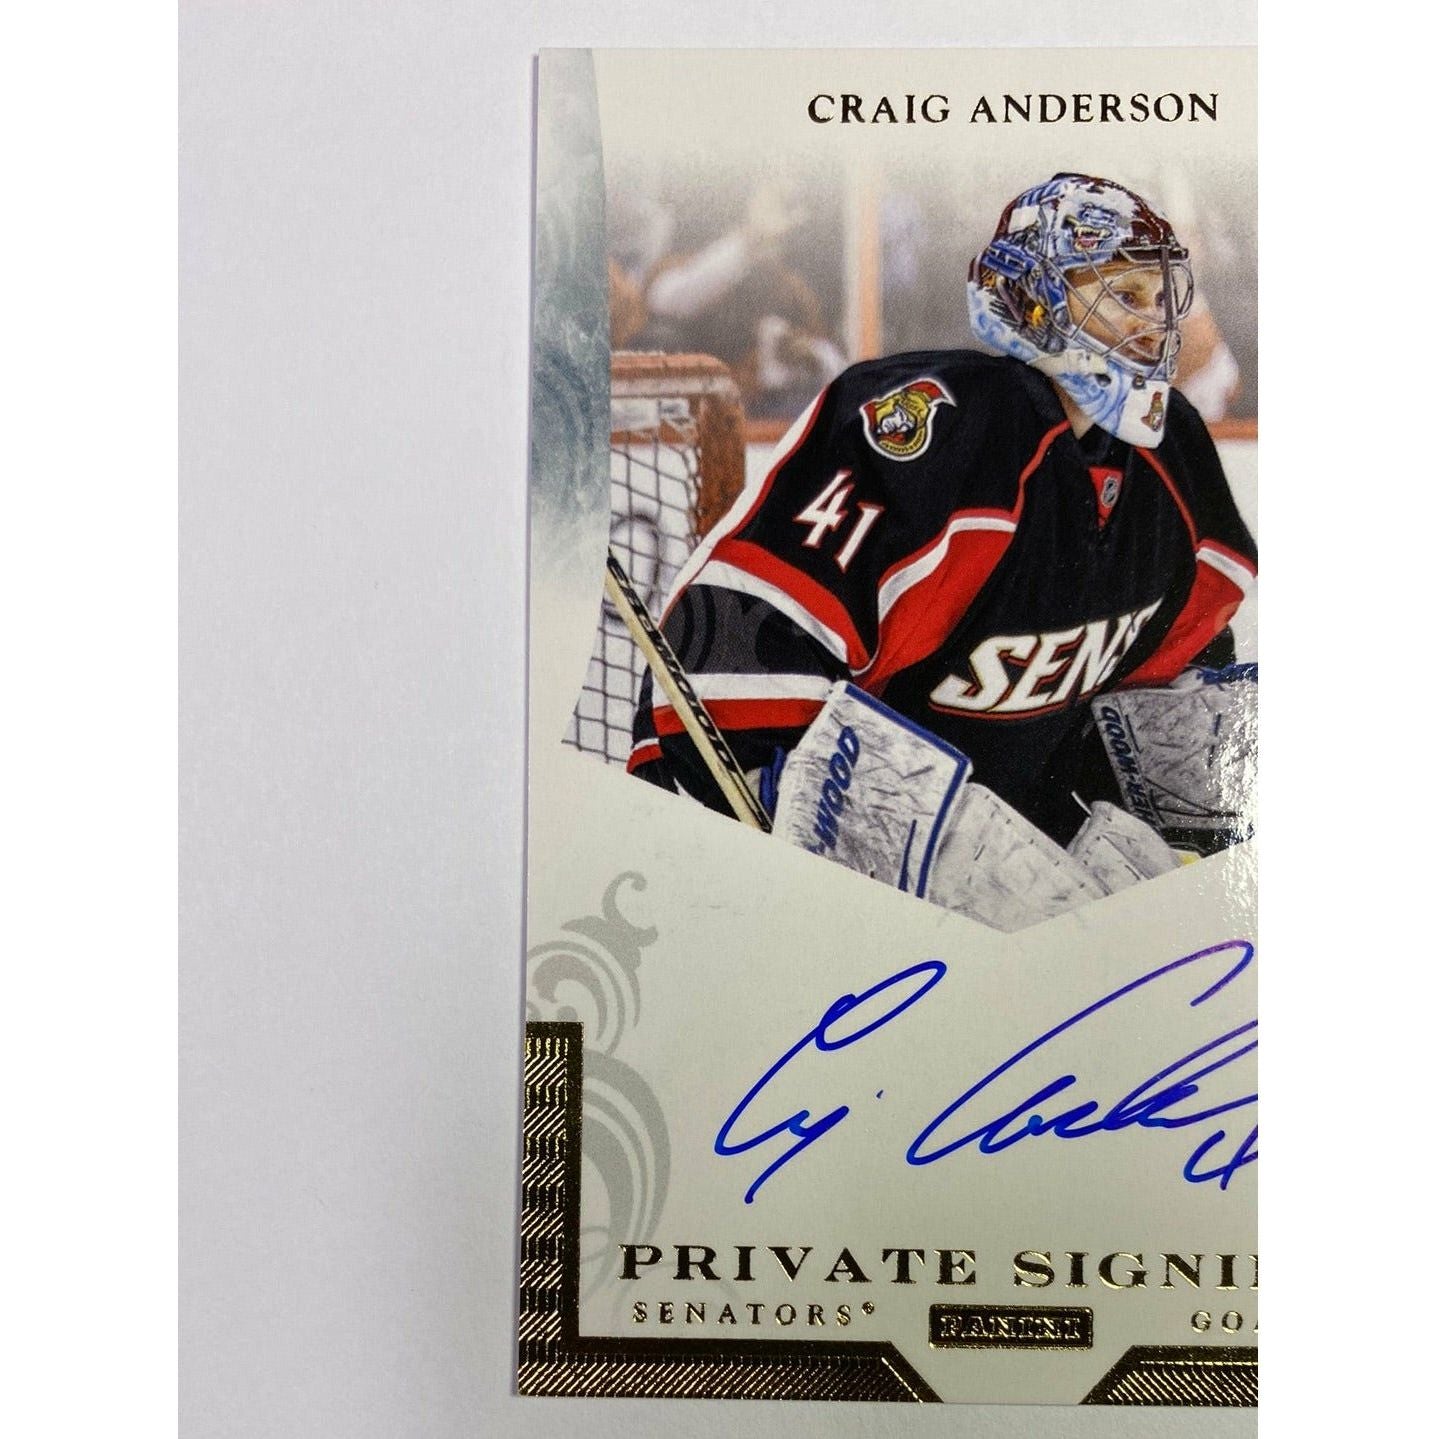 2011-12 Panini Craig Anderson Private Signings